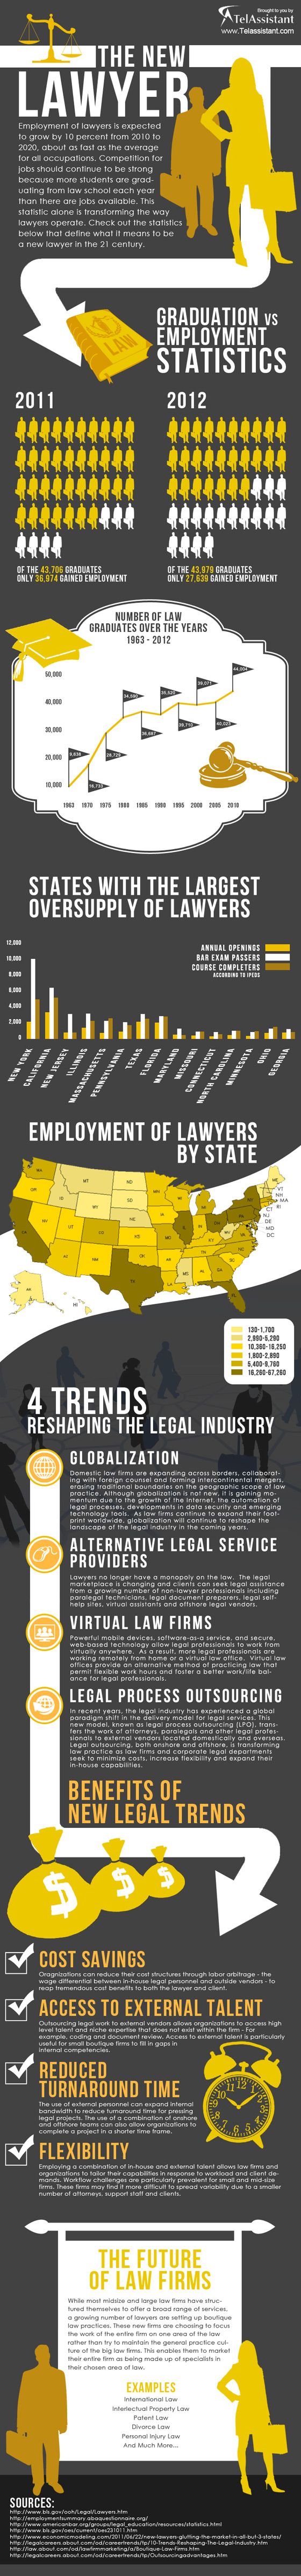 The New Lawyer: Trends That Are Reshaping the Legal Industry 